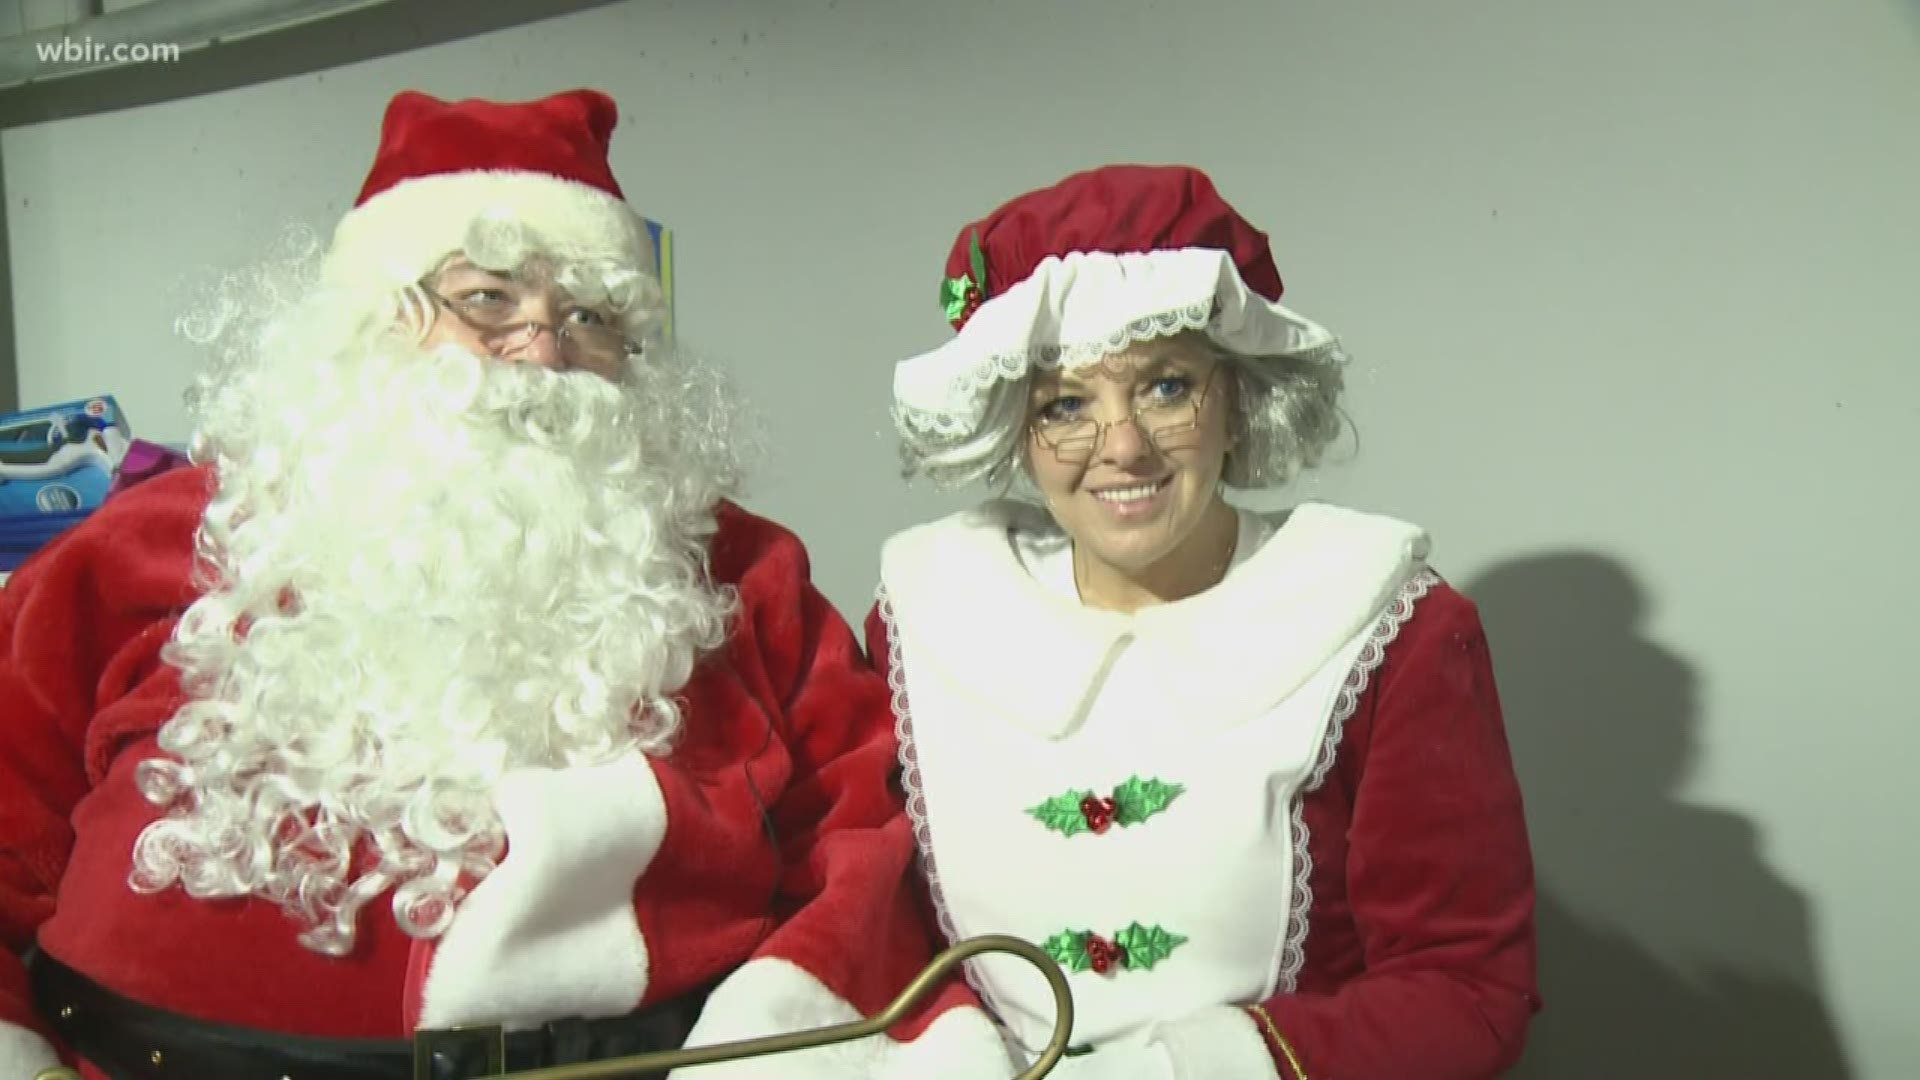 The Santa and Mrs. Claus brought a sleigh full of surprises to East Tennessee Children's Hospital